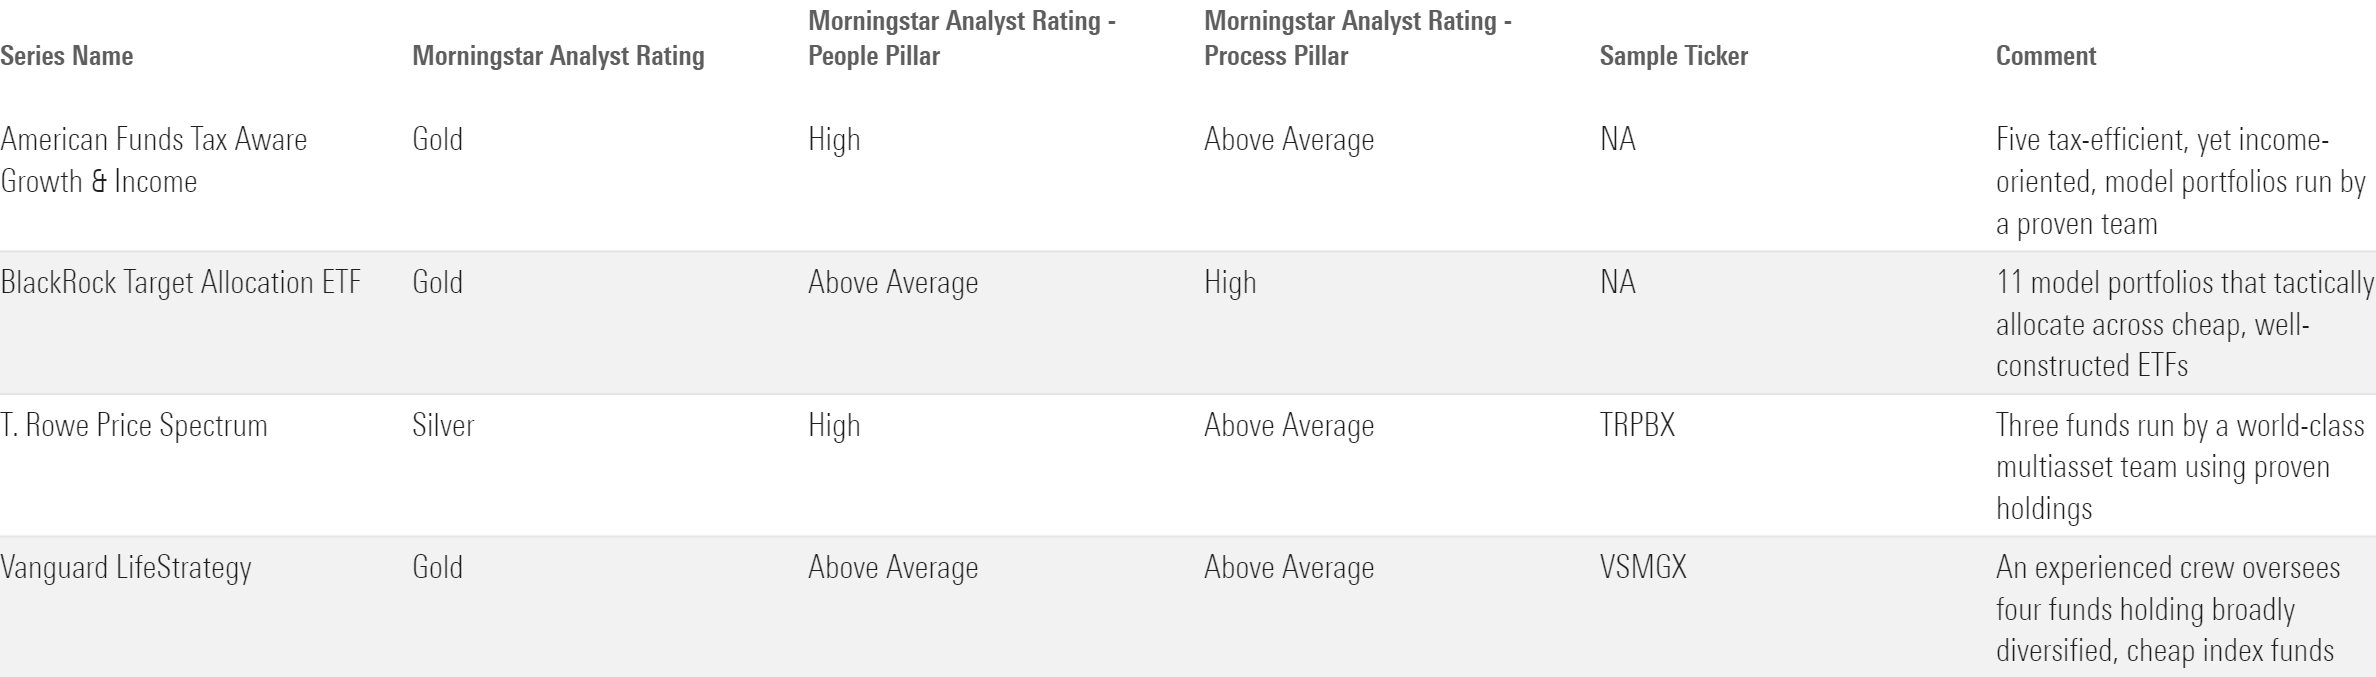 A table showing four target risk series that earn high Morningstar Analyst Ratings.